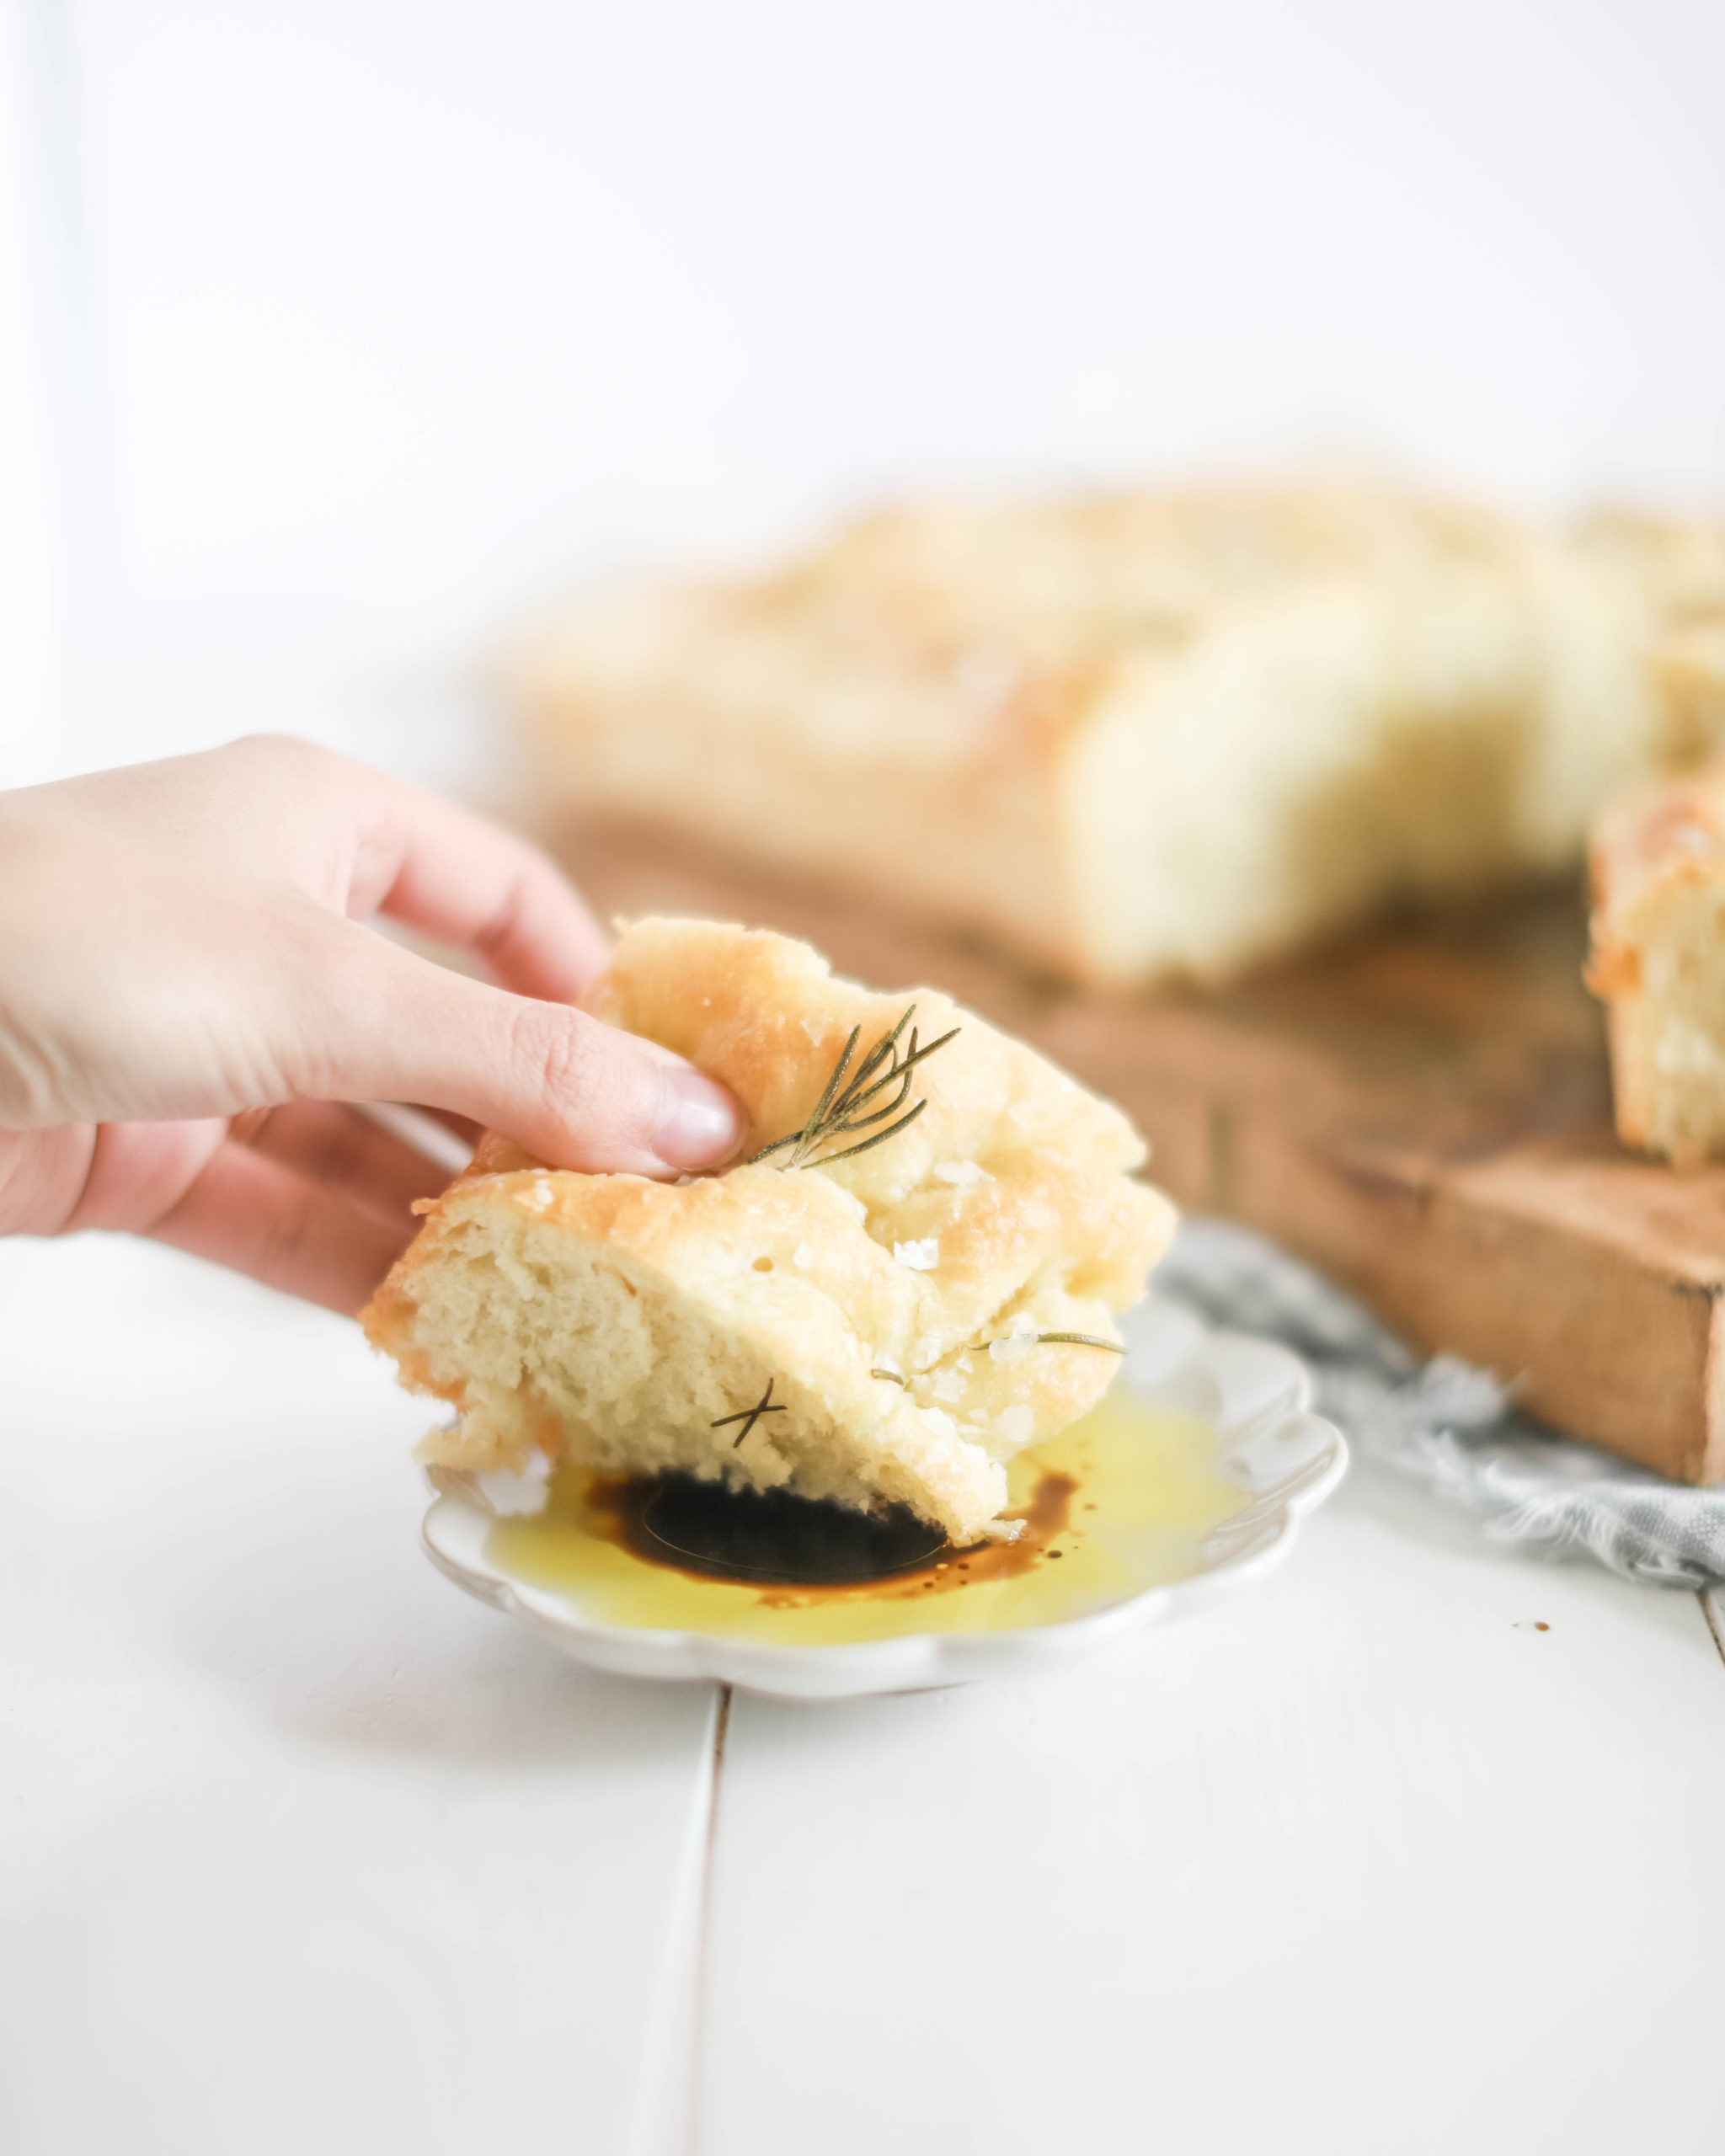 hand grabbing piece of focaccia and dipping in olive oil and balsamic